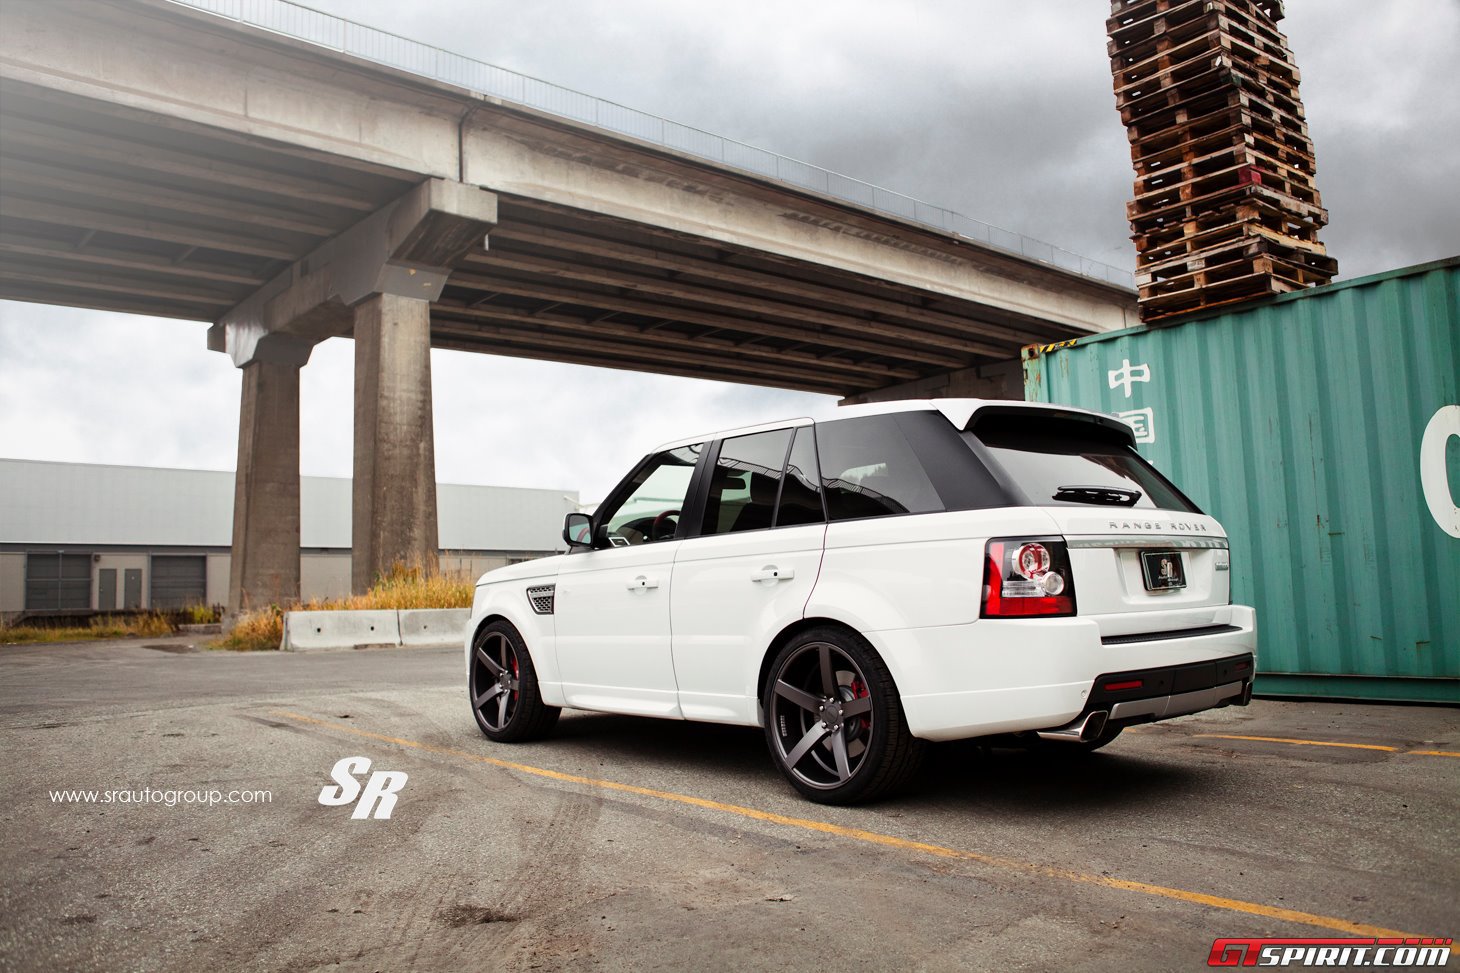 Range Rover Autobiography by SR Auto Group Photo 5